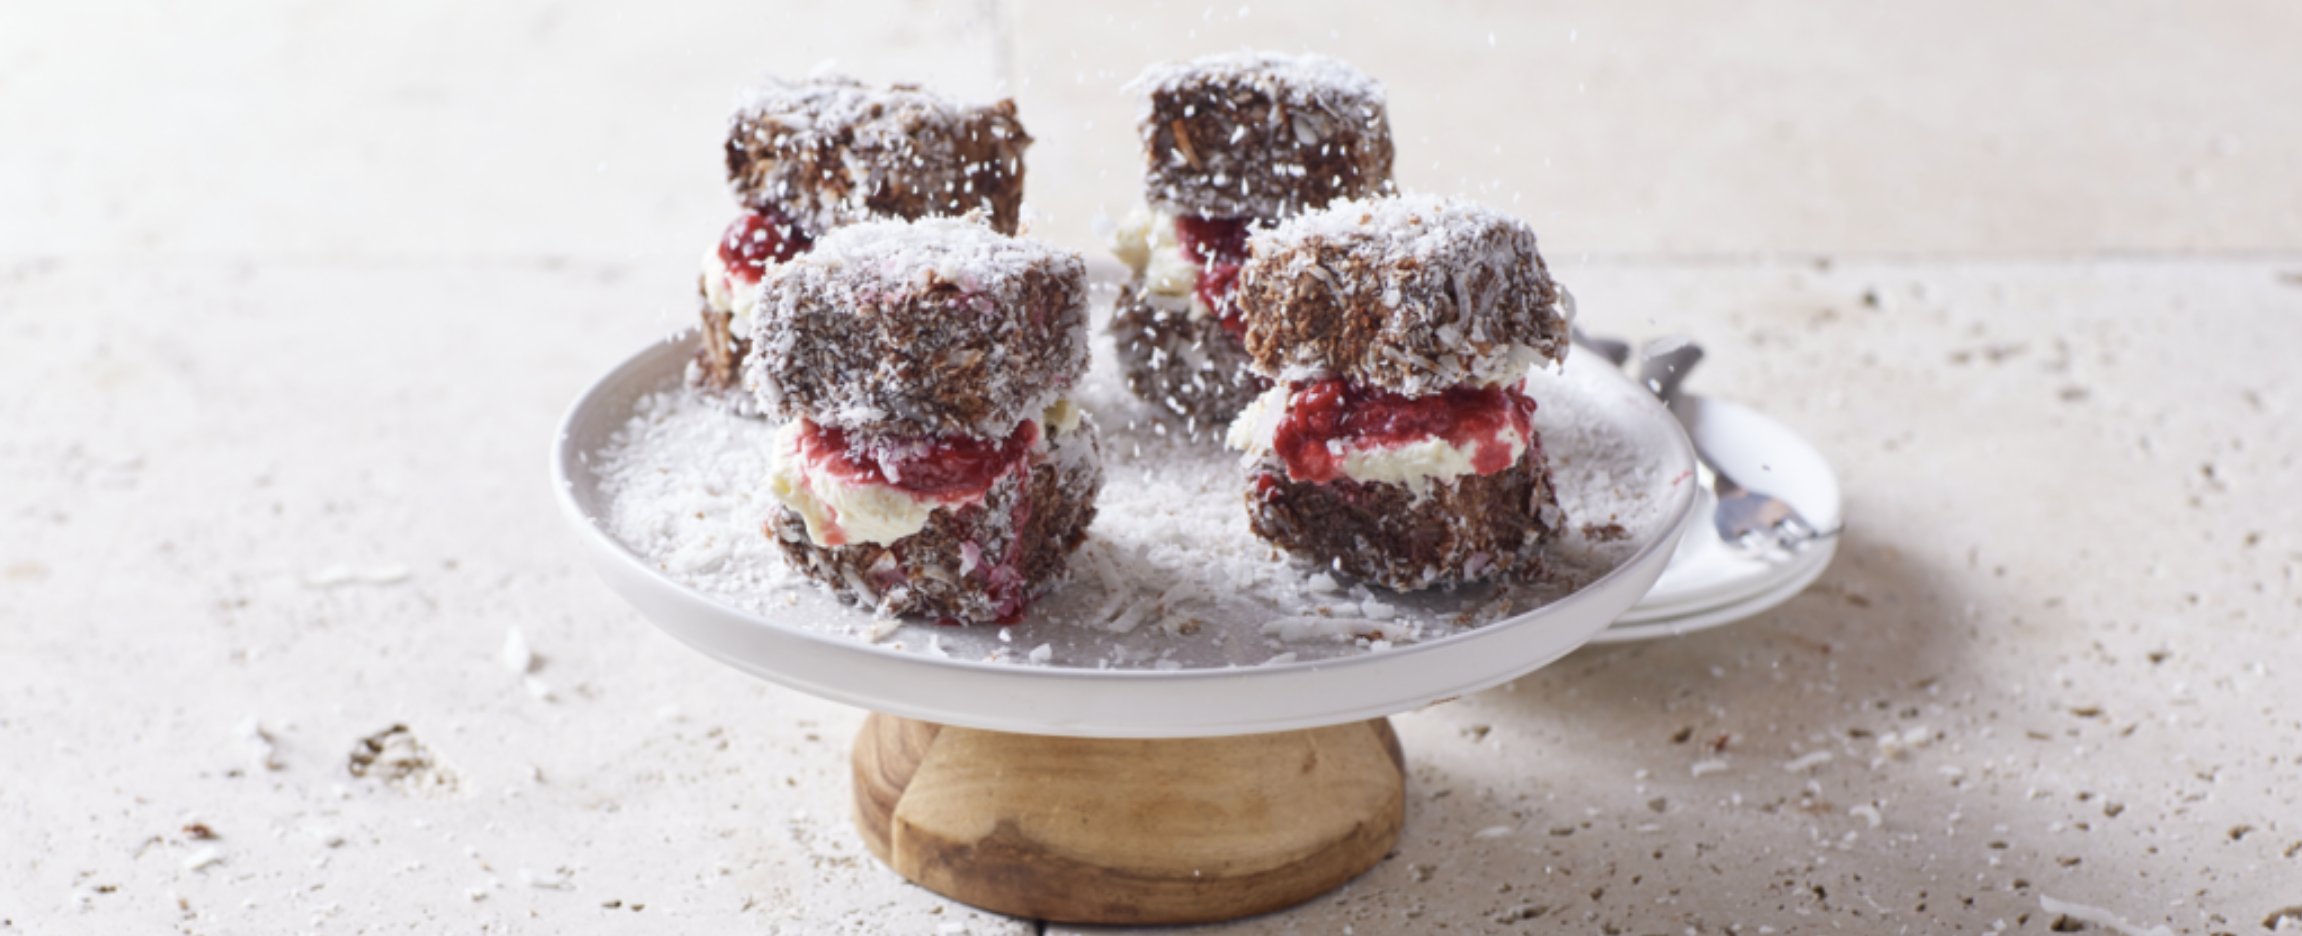 For the Love of (Chocolate) Lamingtons